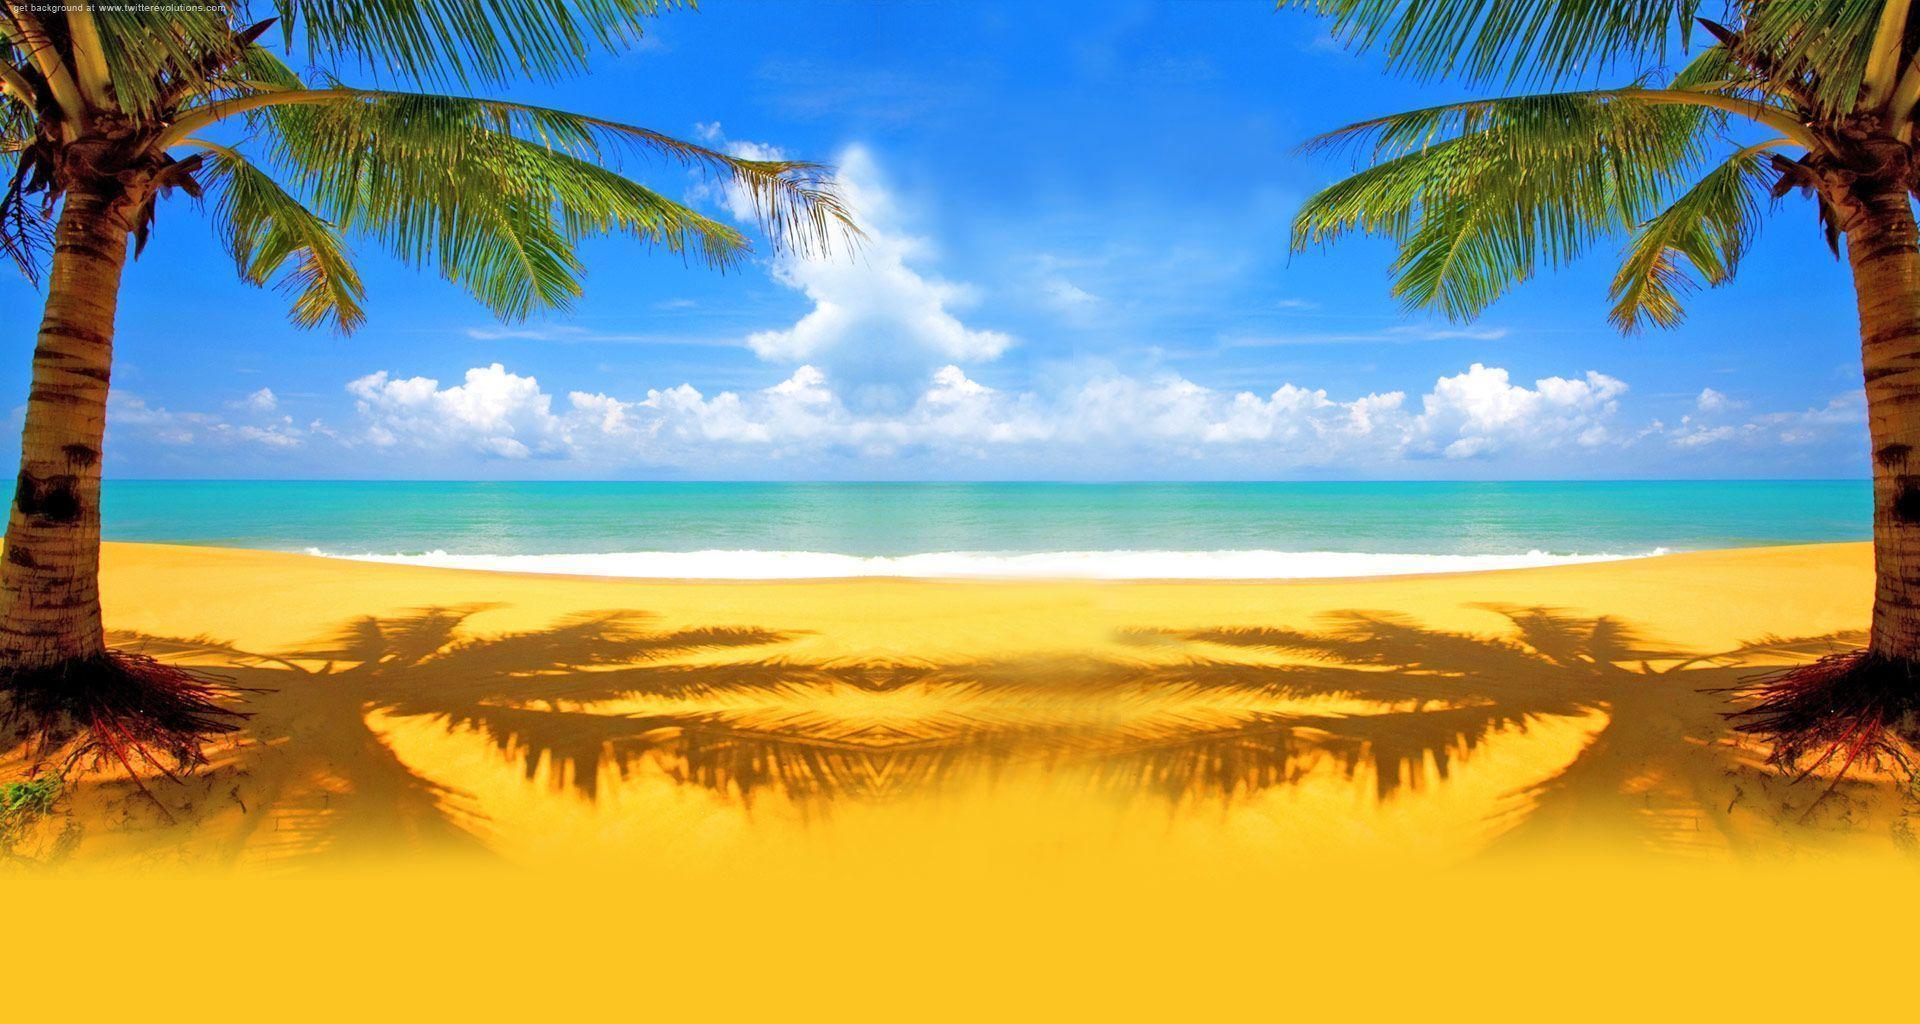 Backgrounds Beach Image - Wallpaper Cave